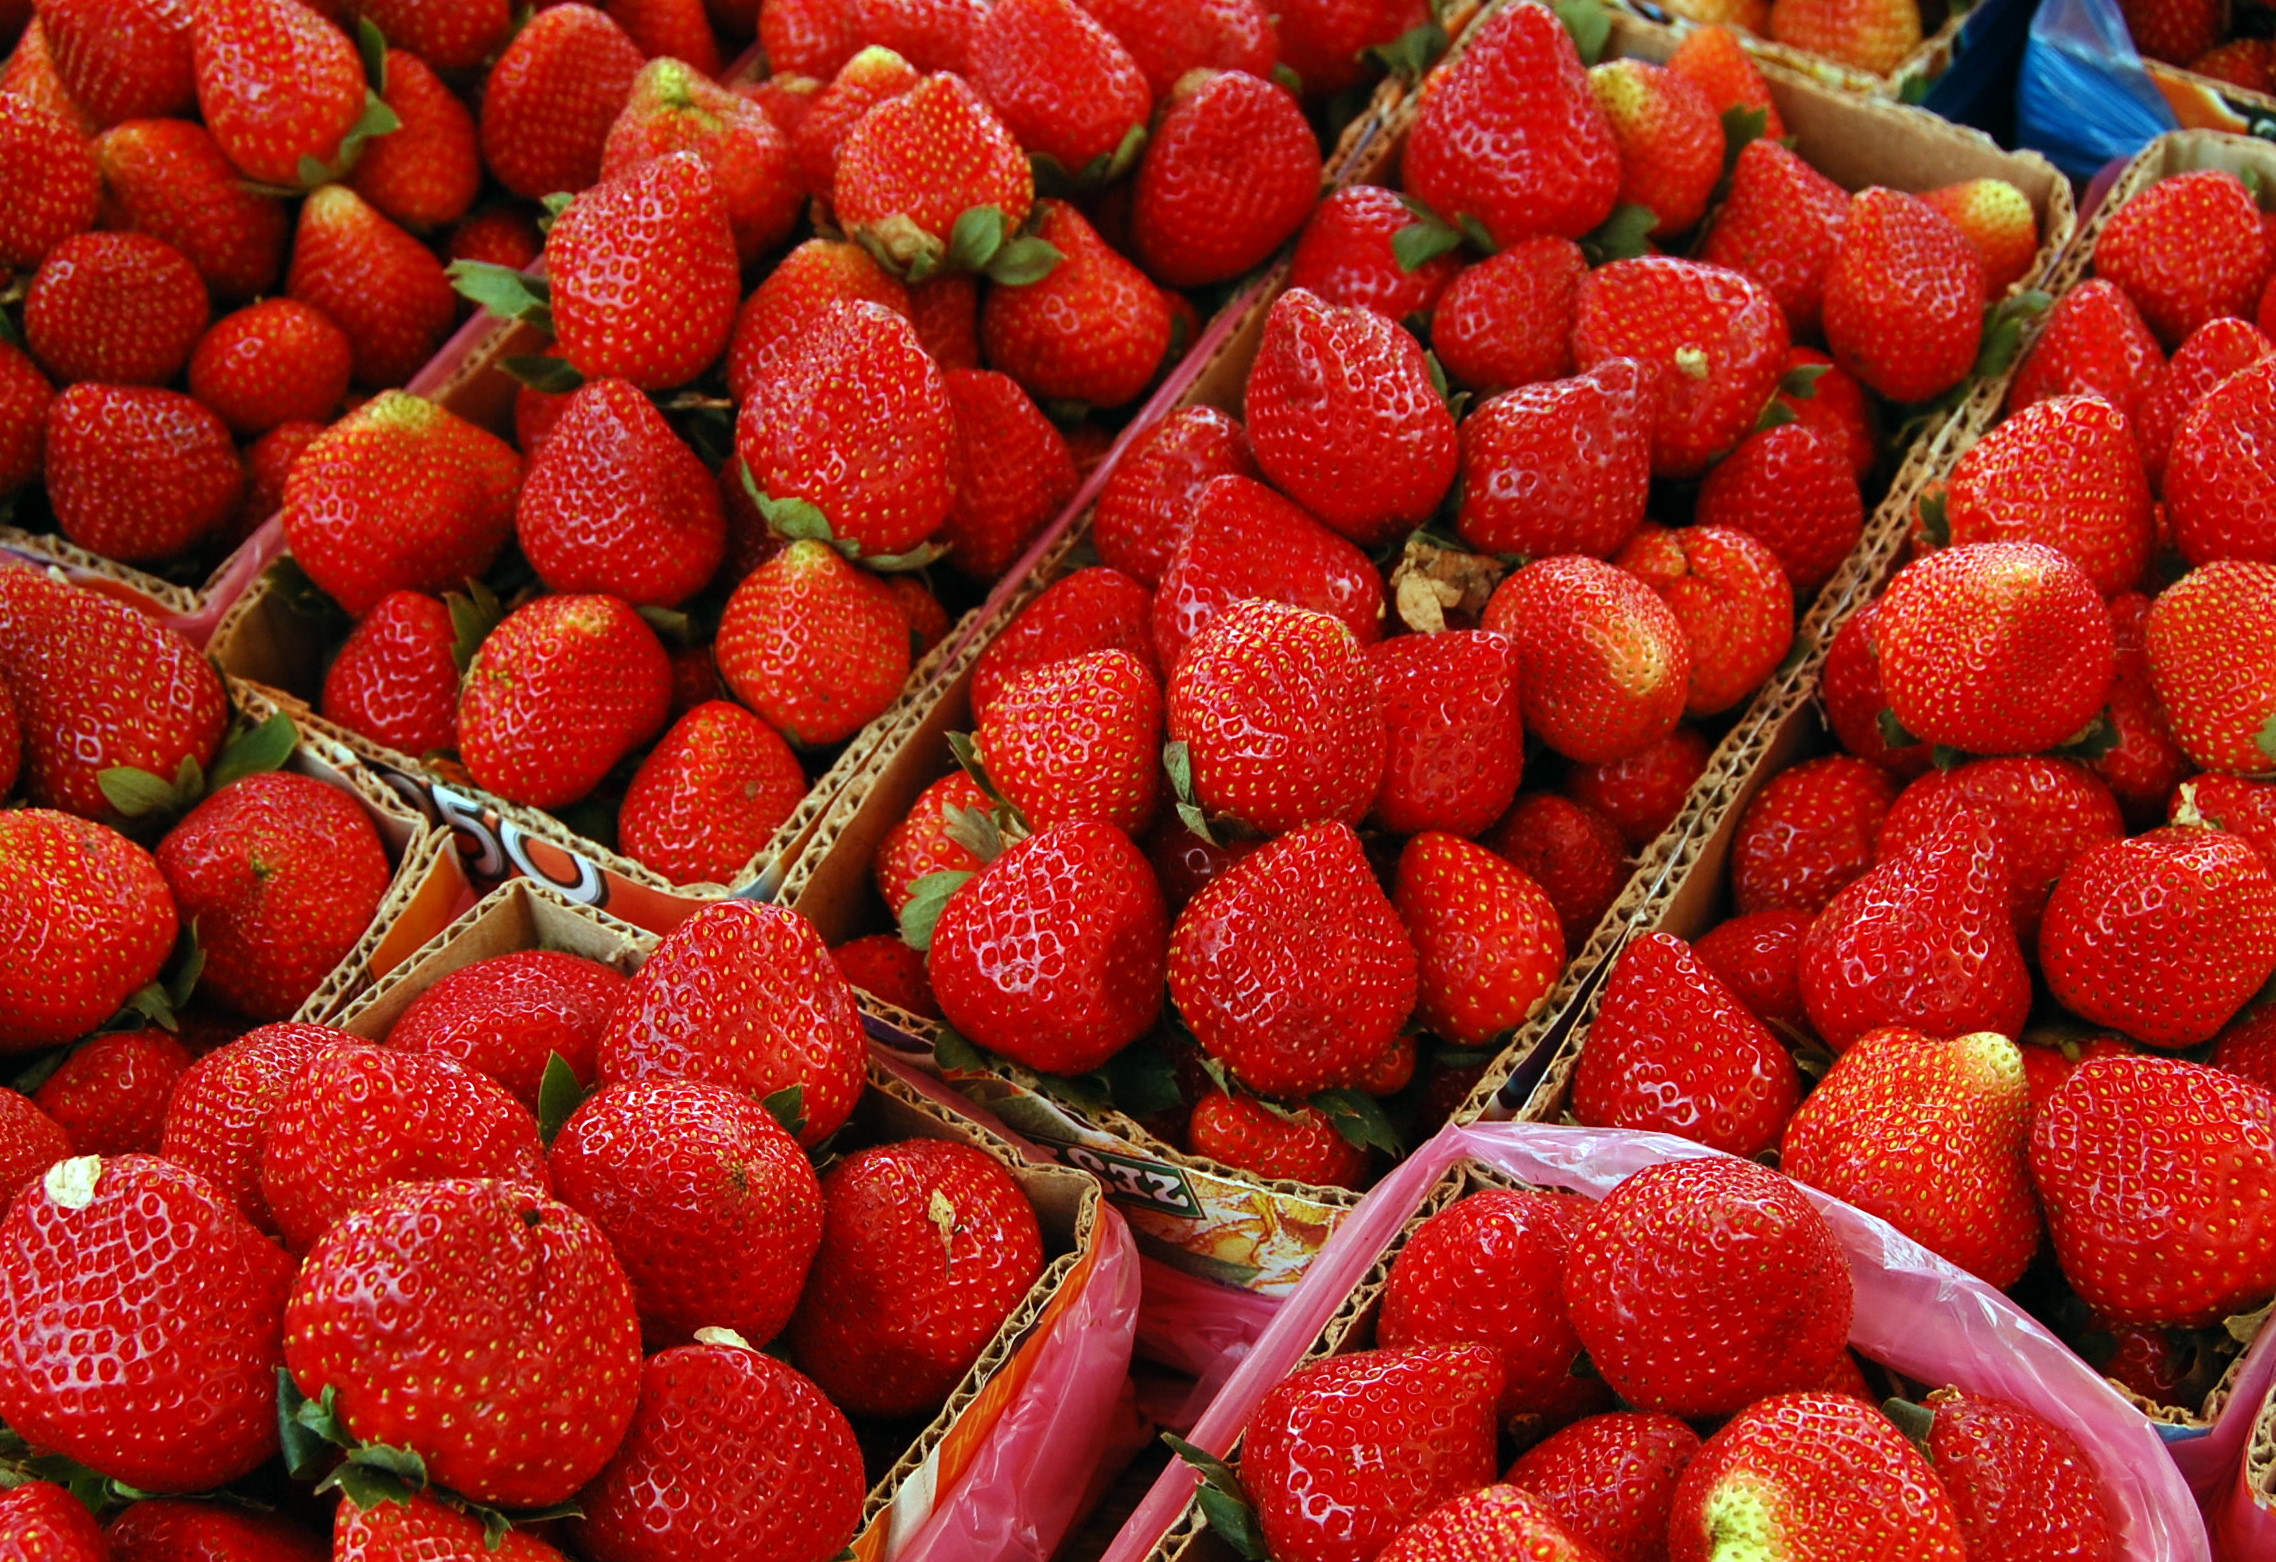 Strawberries for sale in the Philippines